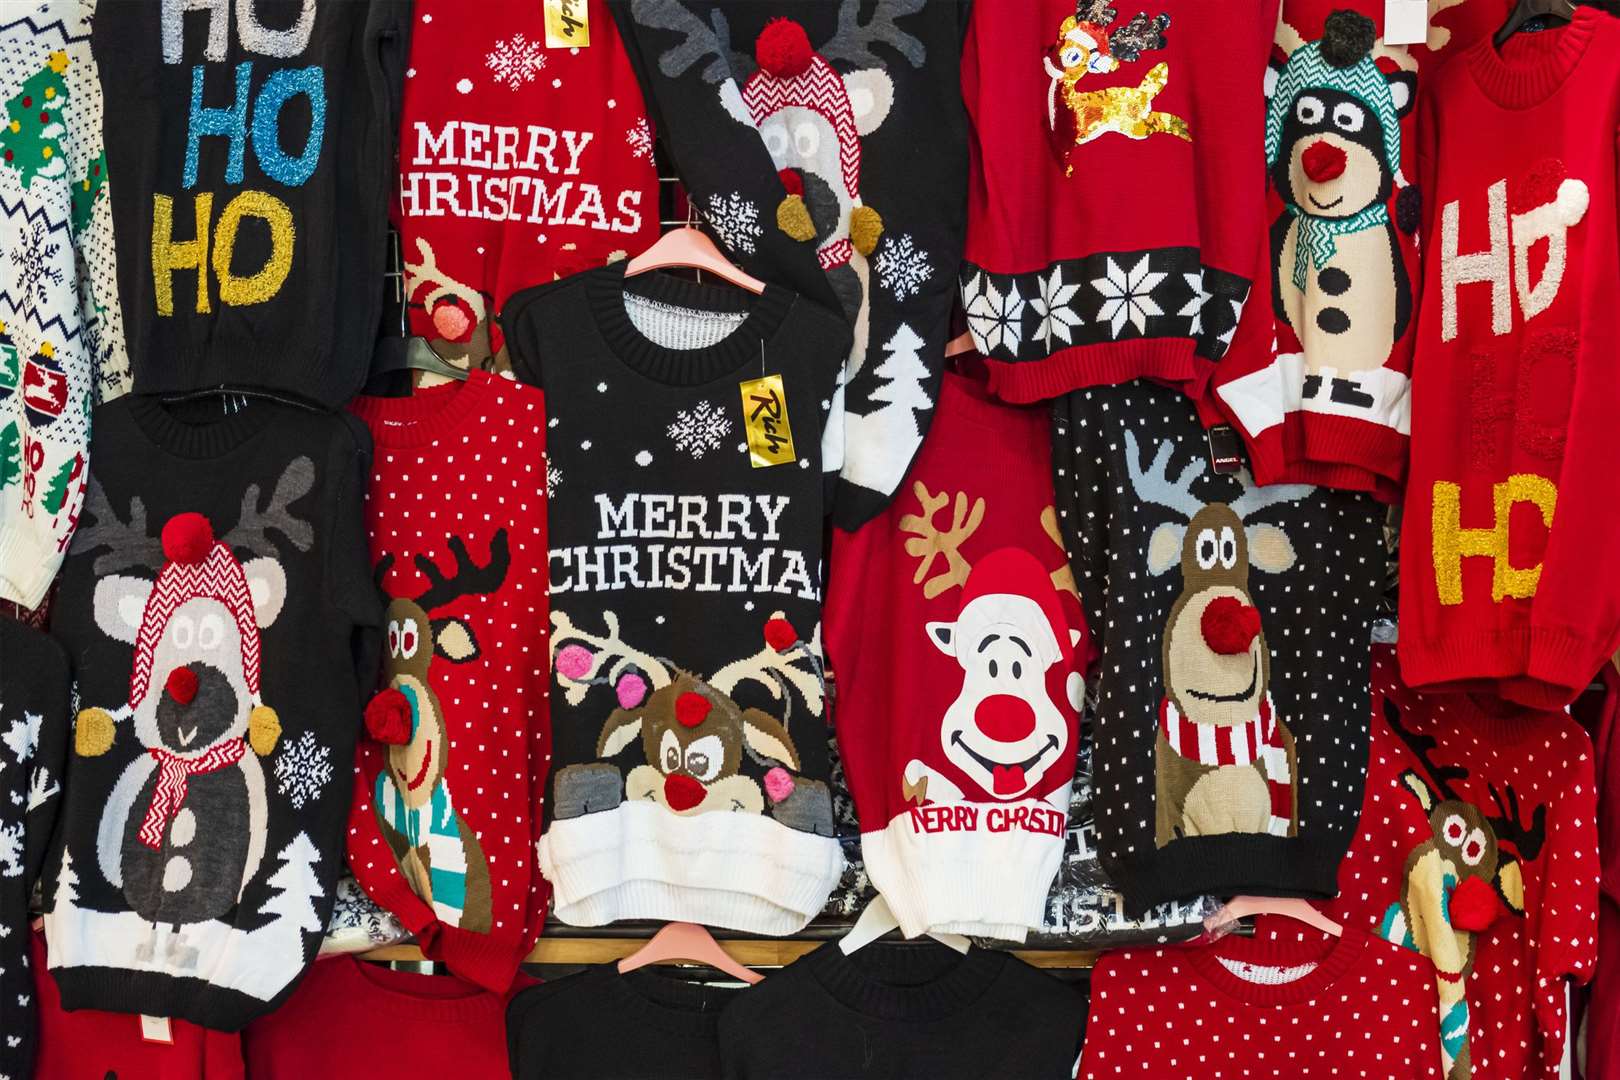 Swap or upcycle old Christmas jumpers for a sustainable alternative